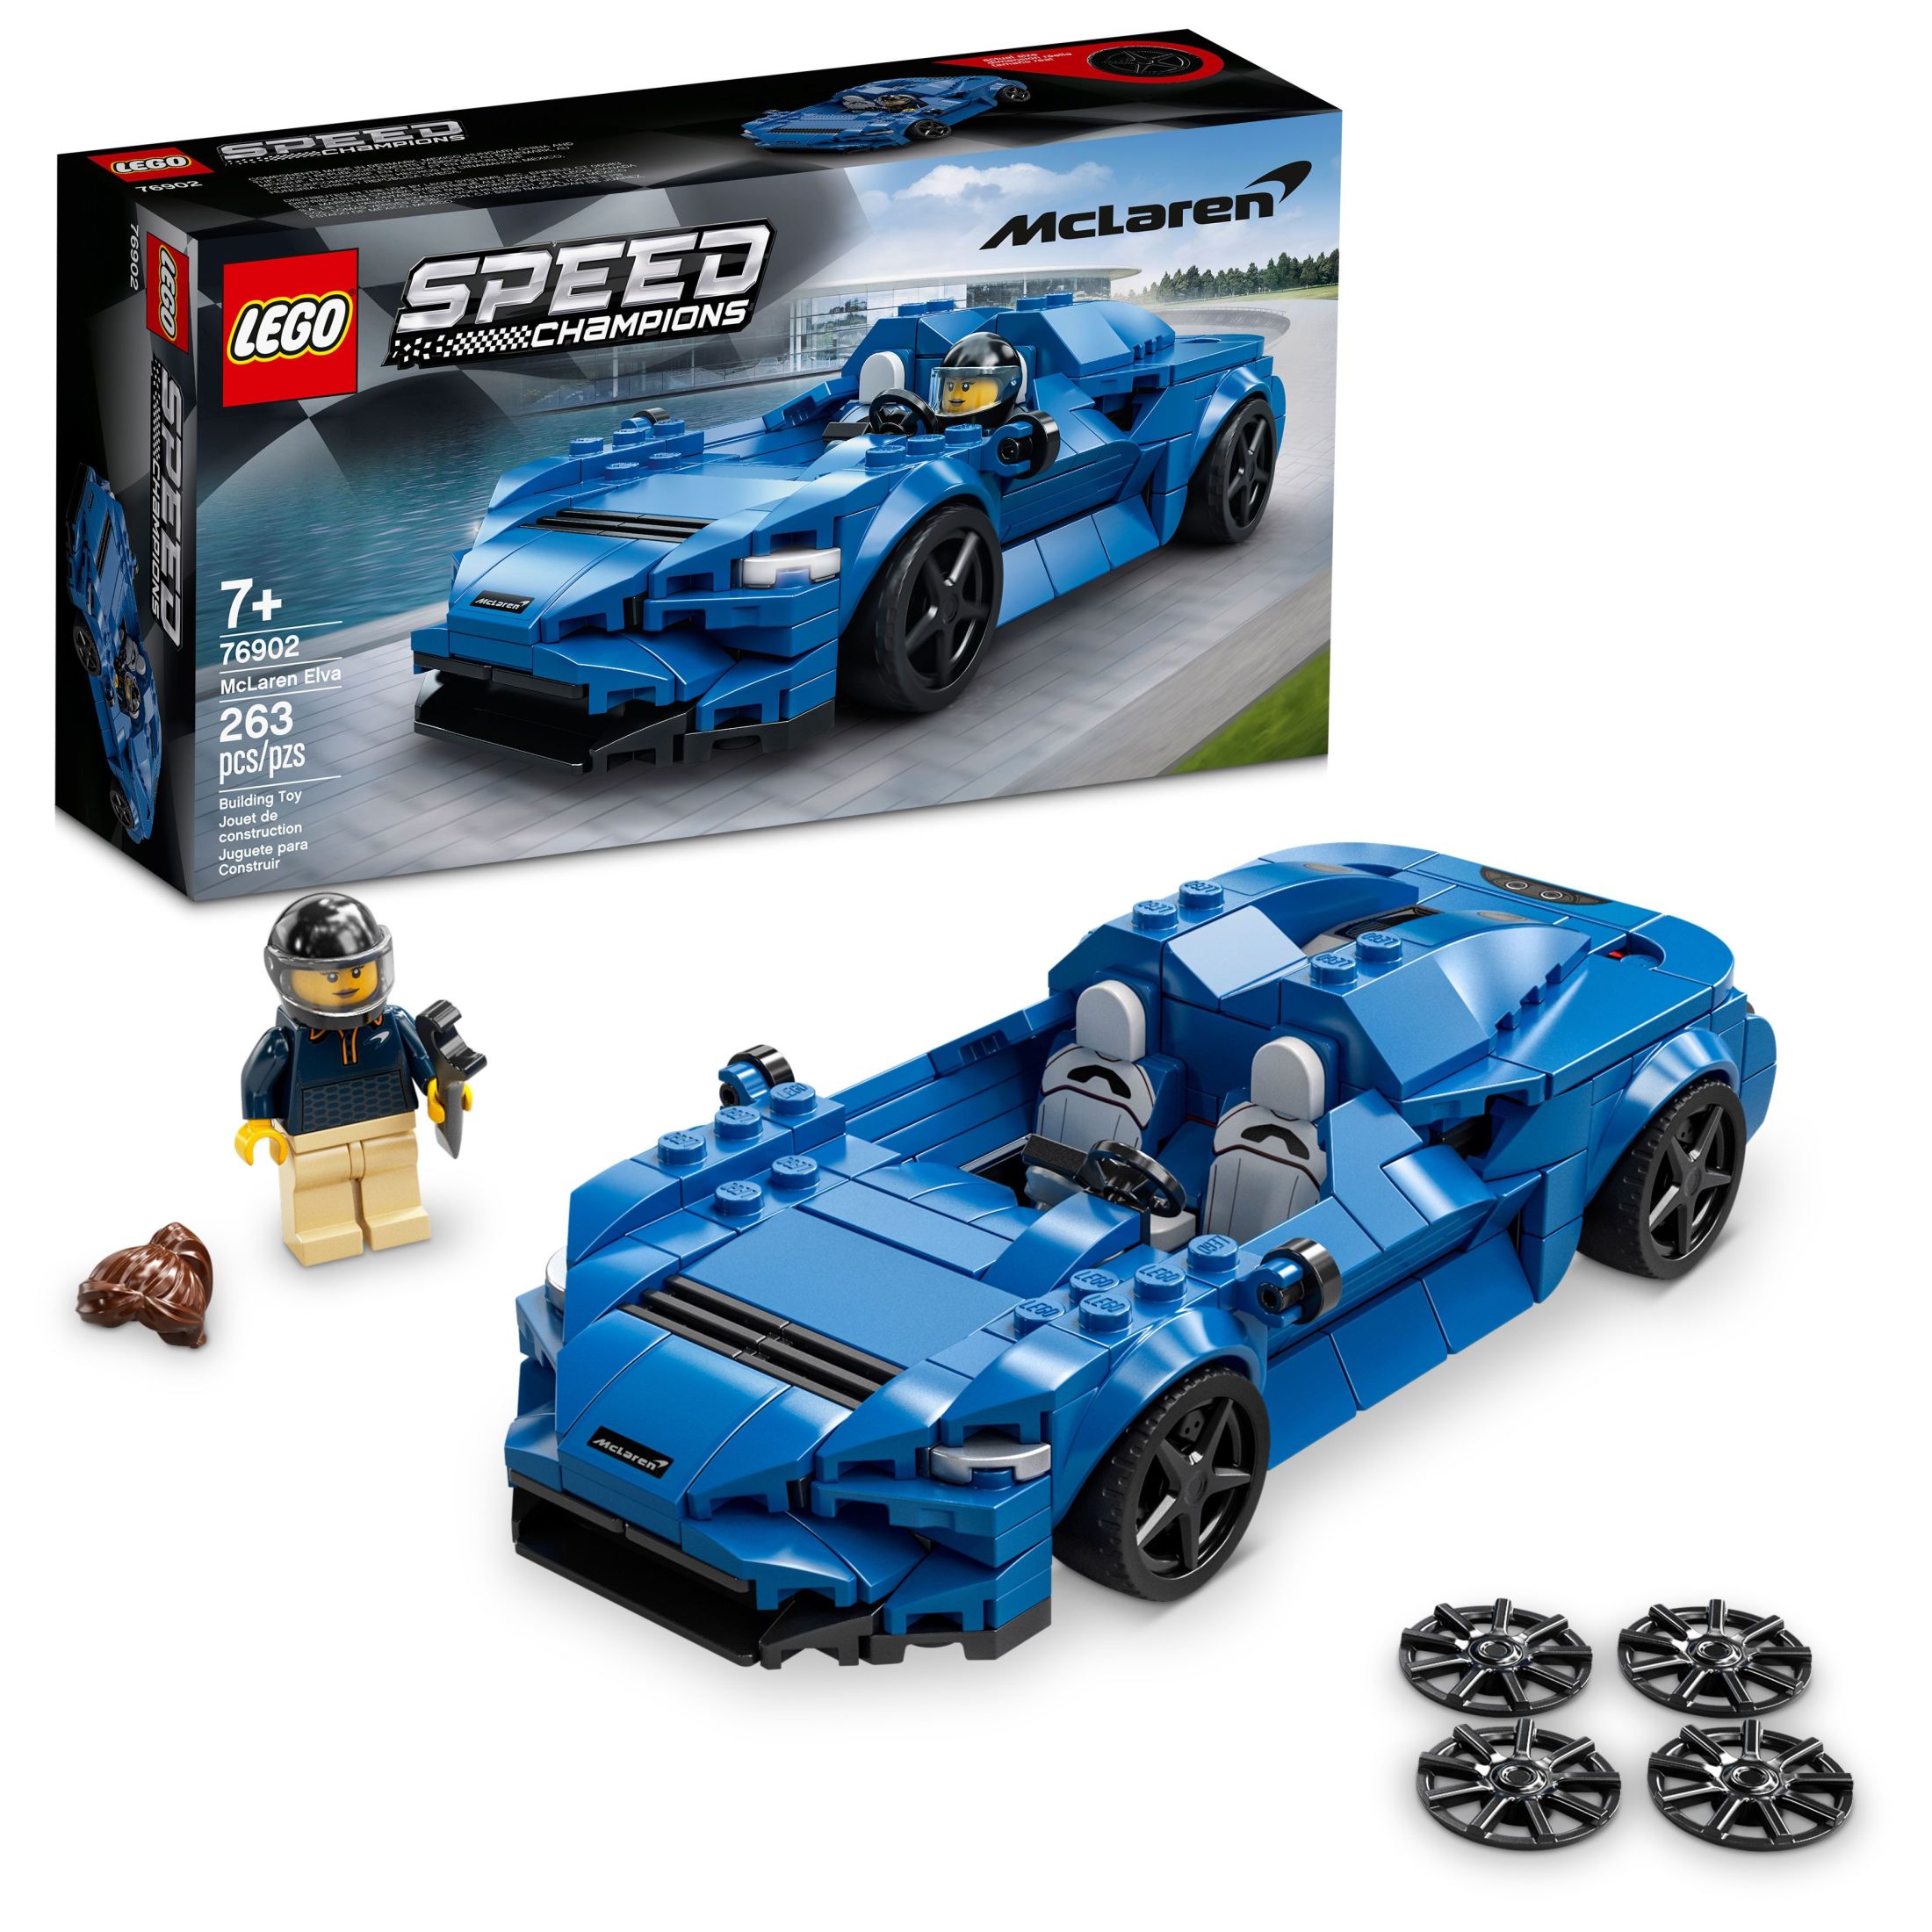 LEGO Speed Champions McLaren Elva 76902 Buildable Toy Car for Kids (263 Pieces) - image 1 of 8